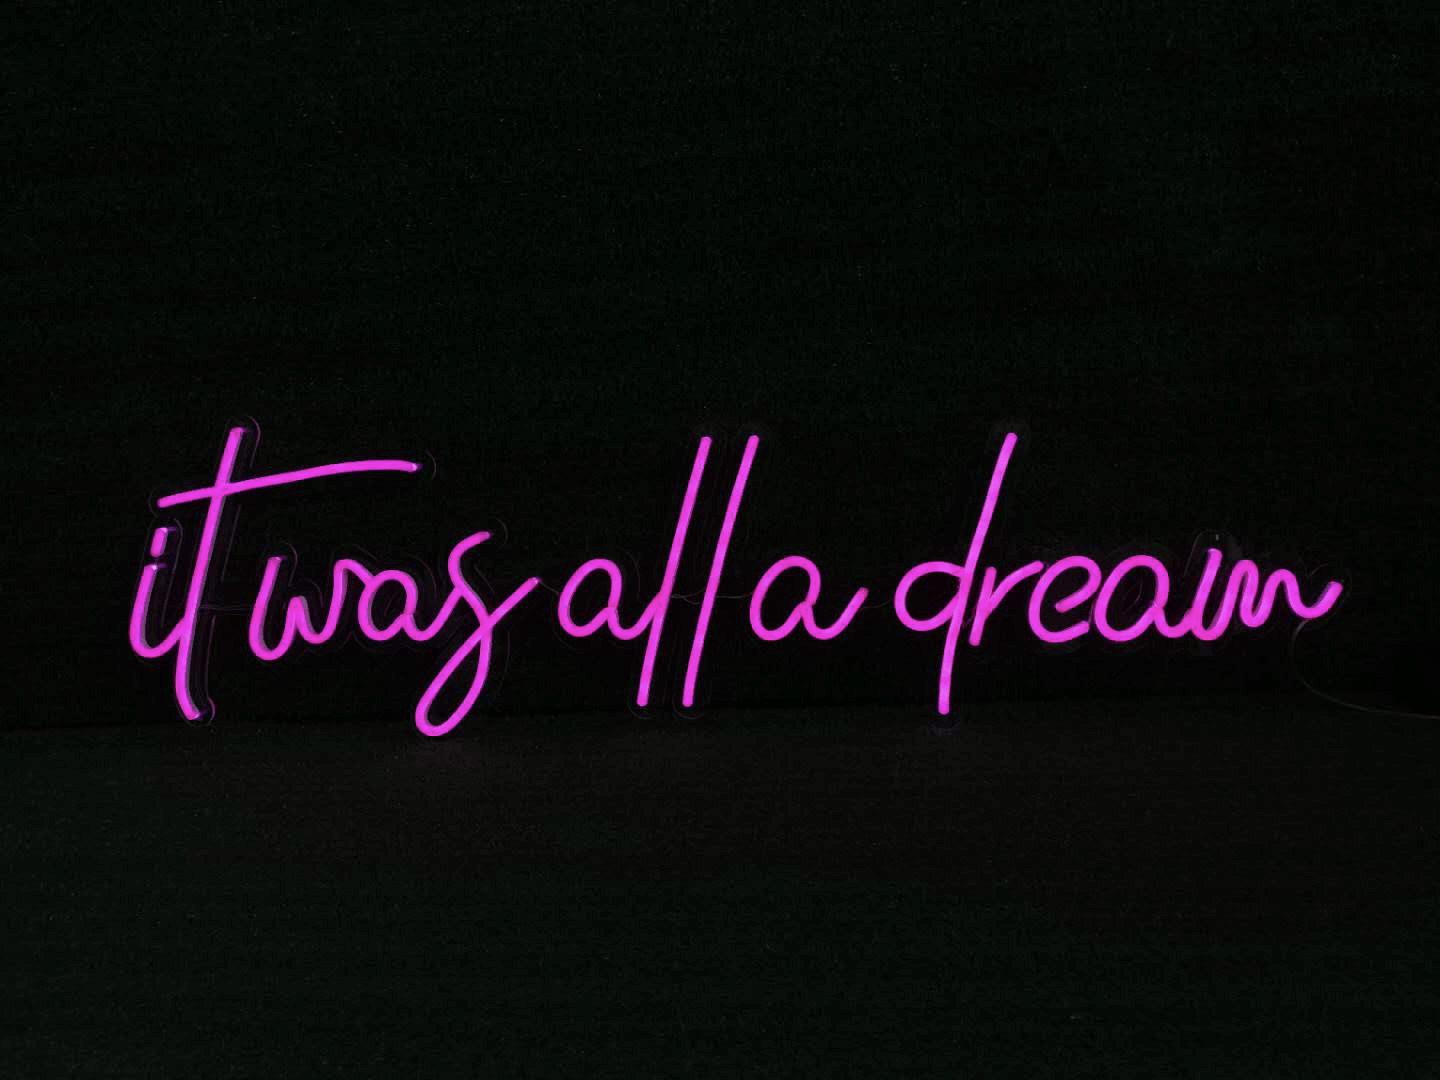 It was all a dream - Good Vibes Neon